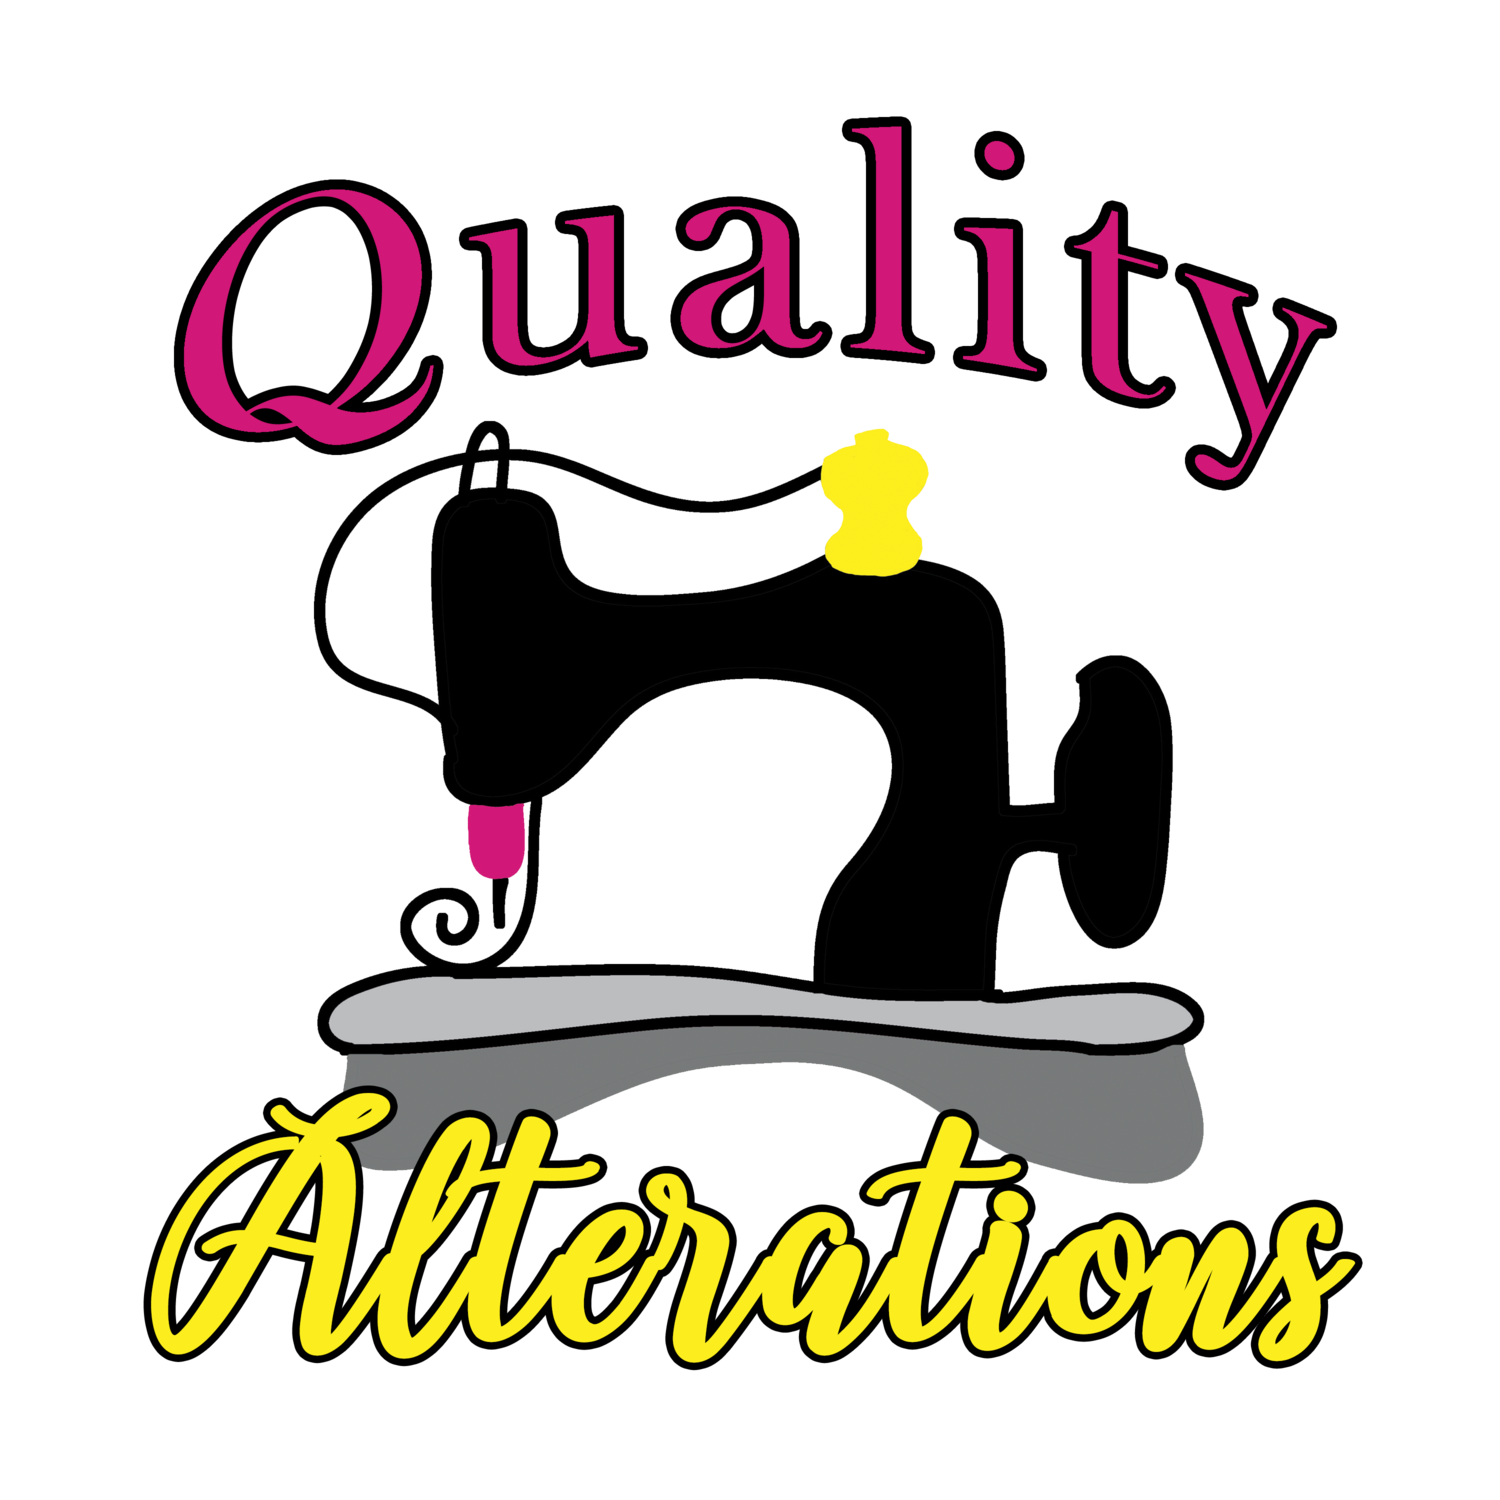 Quality Alterations